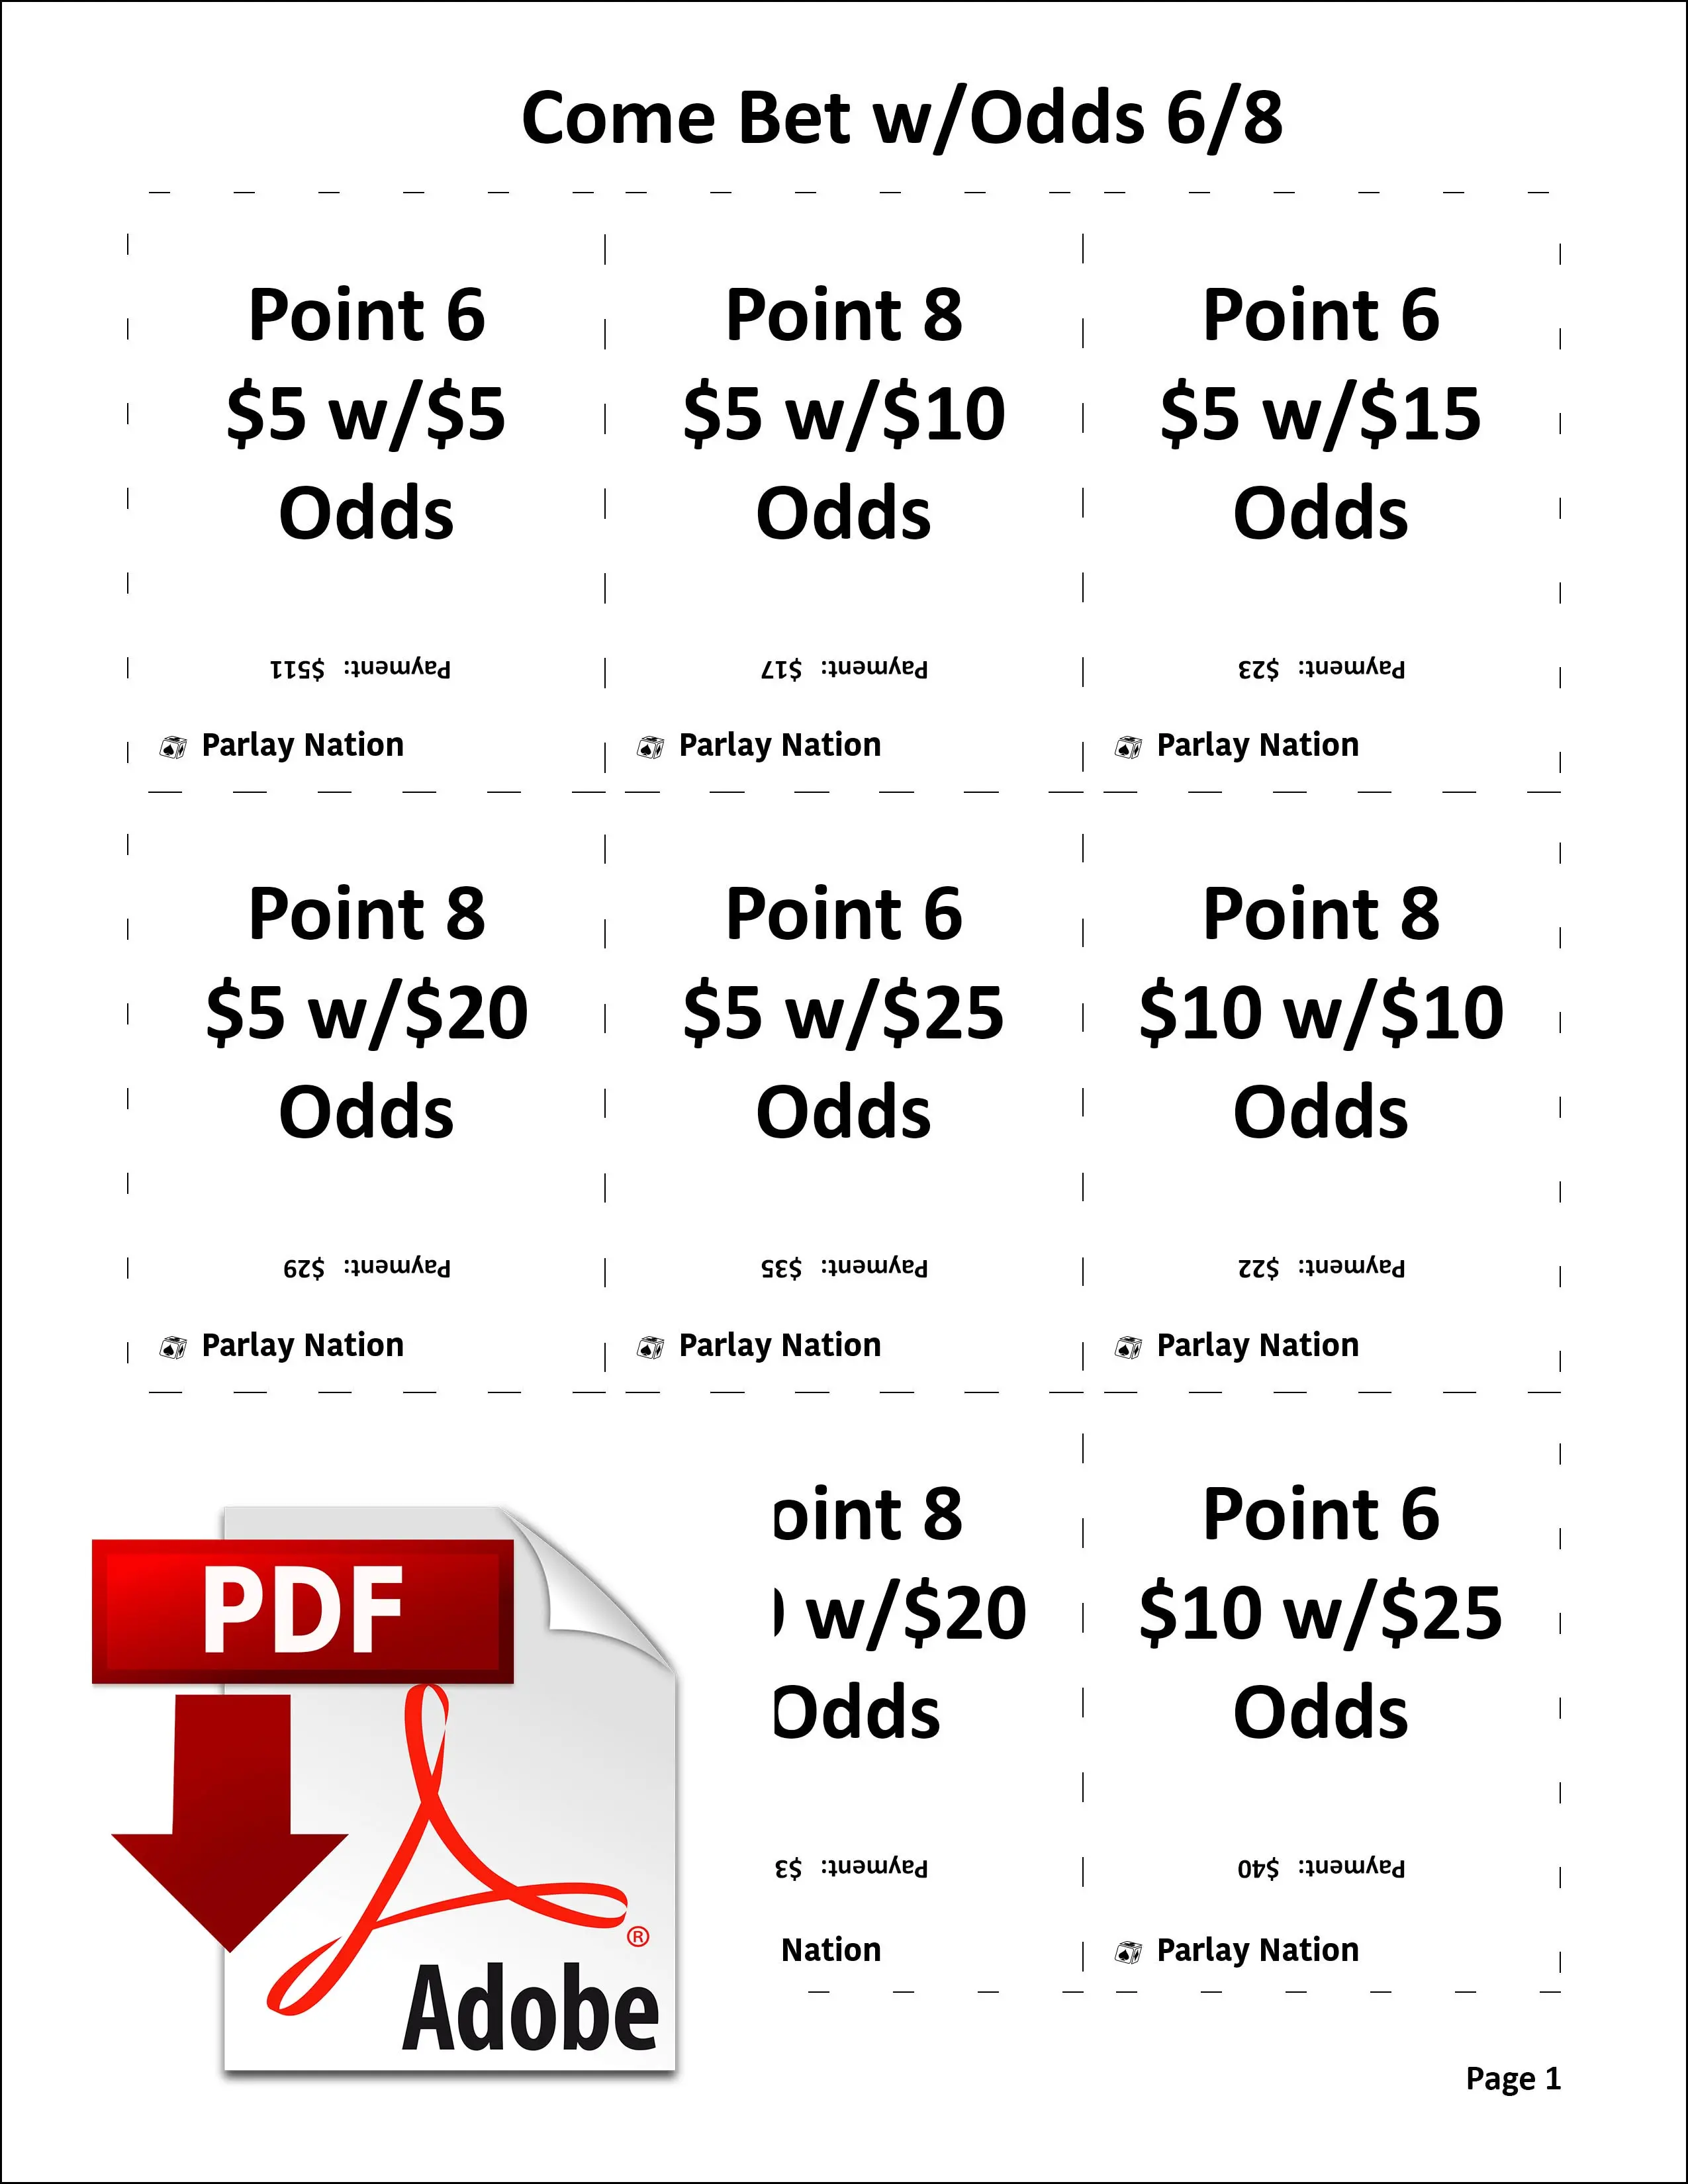 Come Bet w/Odds Payments 6 & 8 cover sheet.